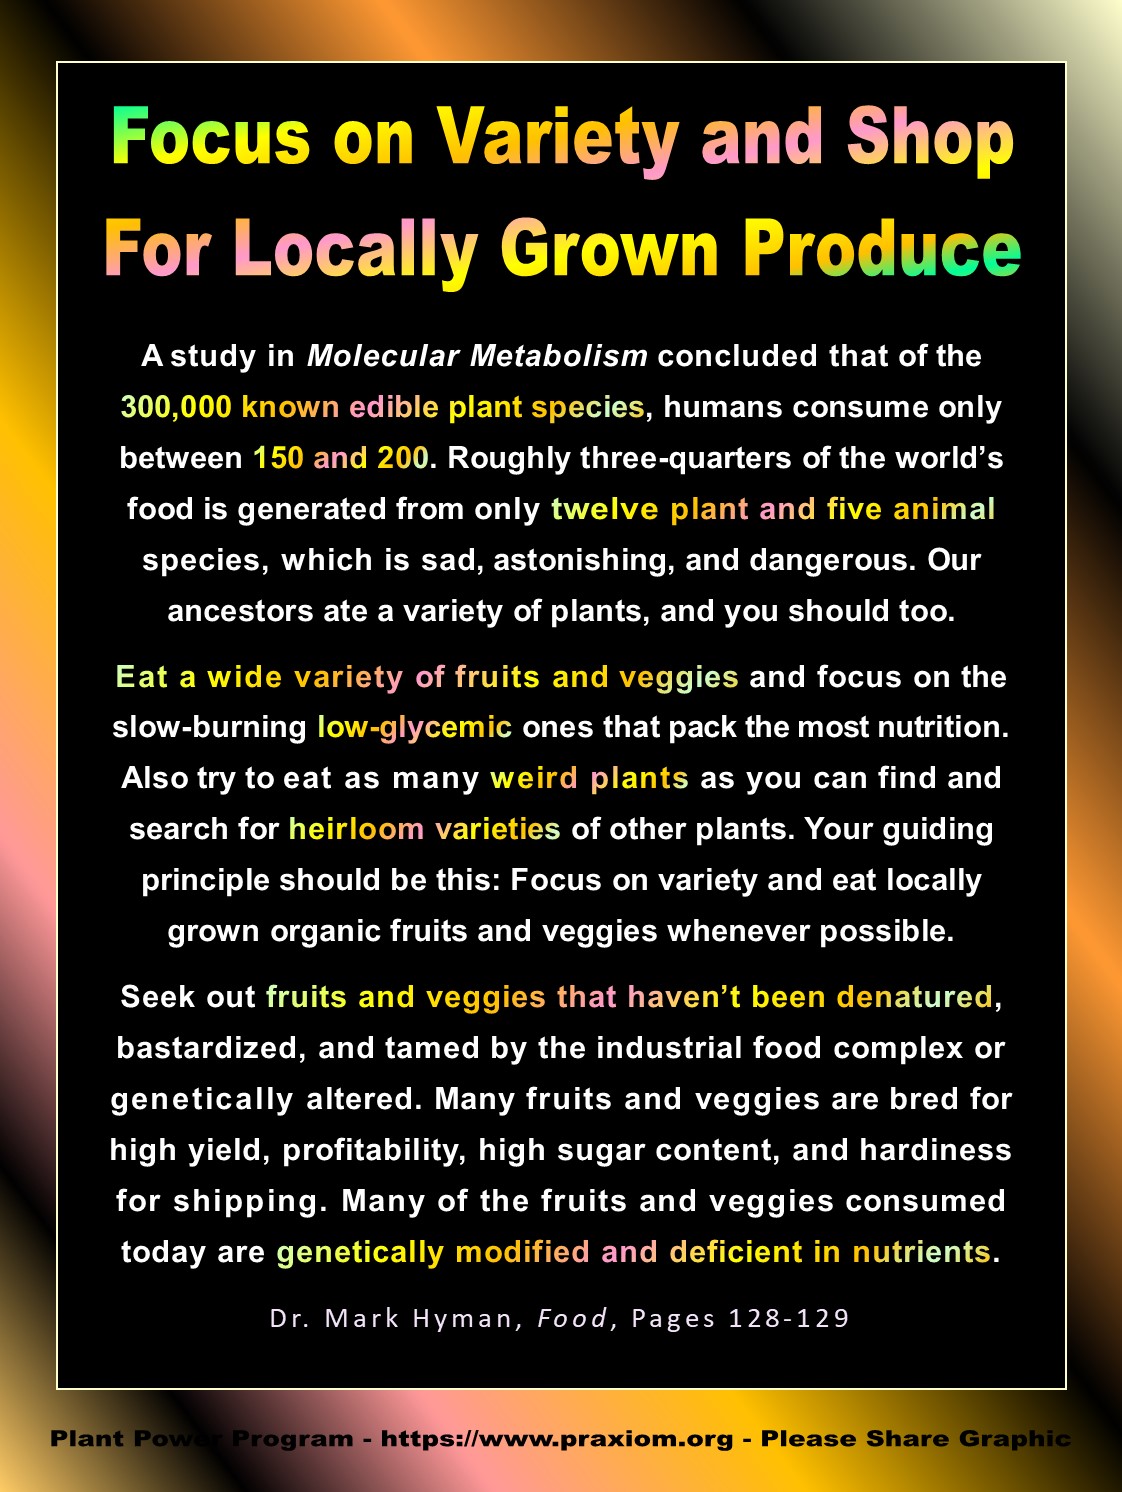 Focus on Variety and Shop for Local Produce - Dr. Mark Hyman